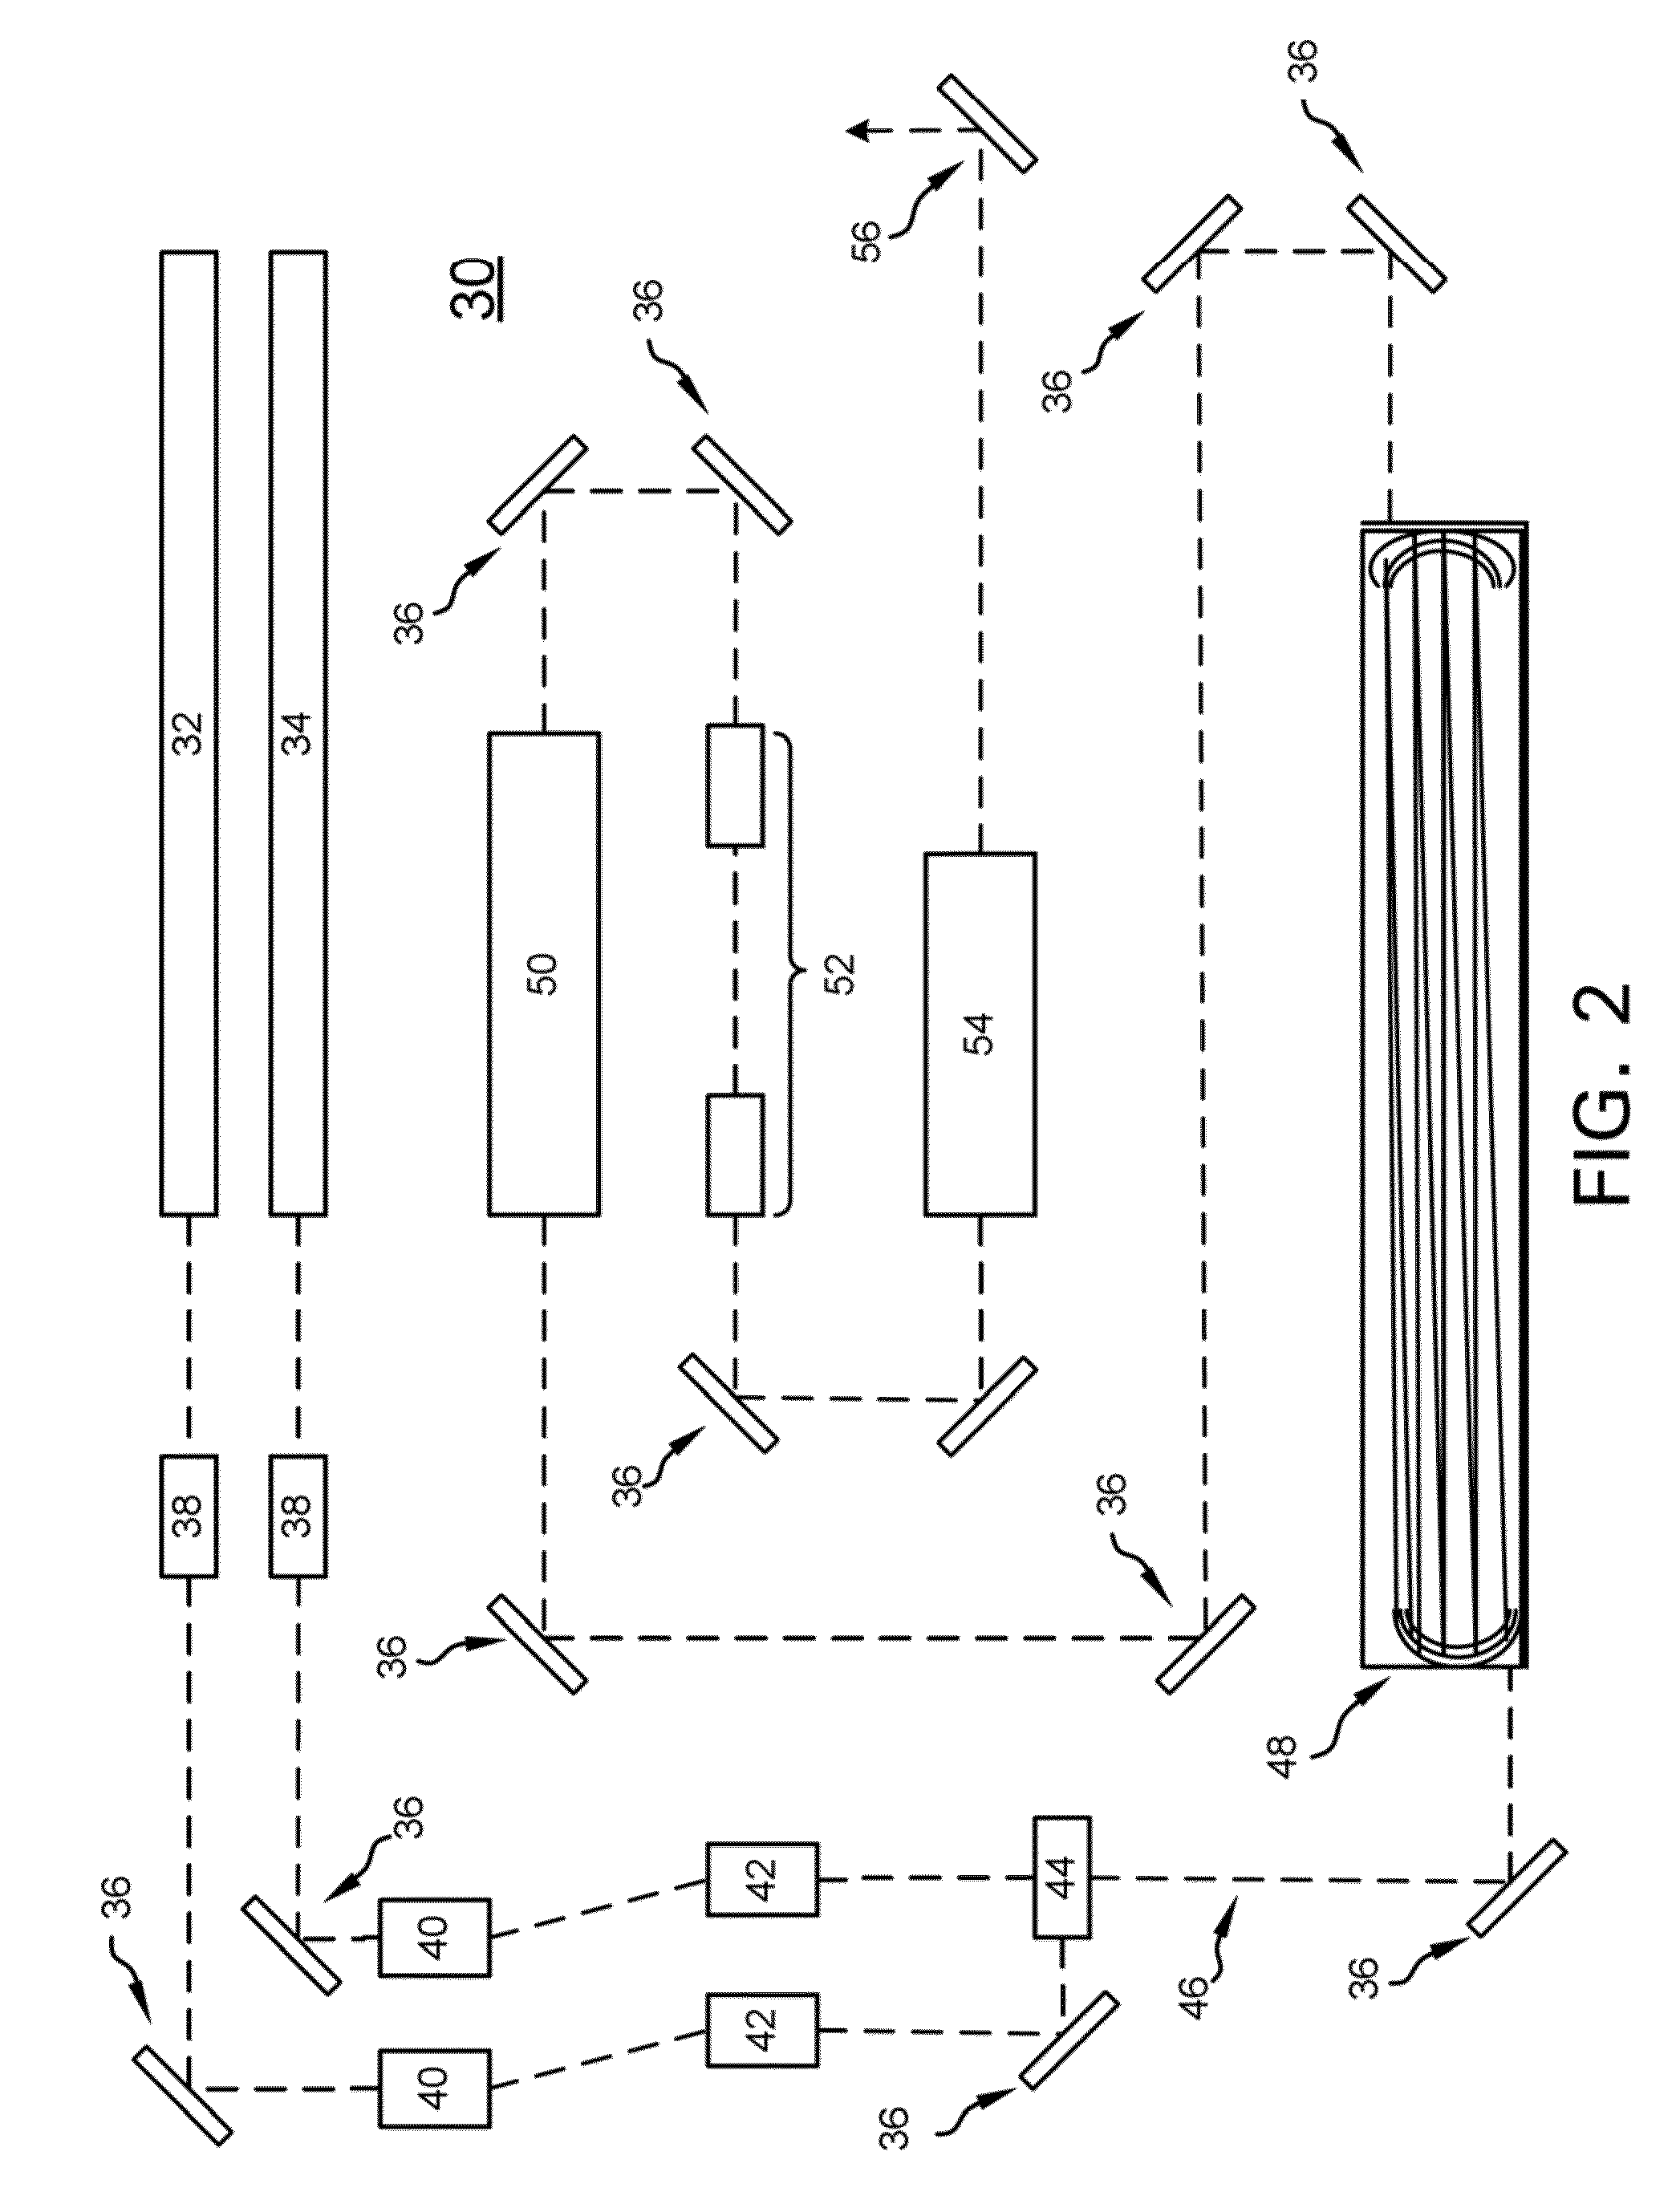 System and Method for Seed Laser Mode Stabilization